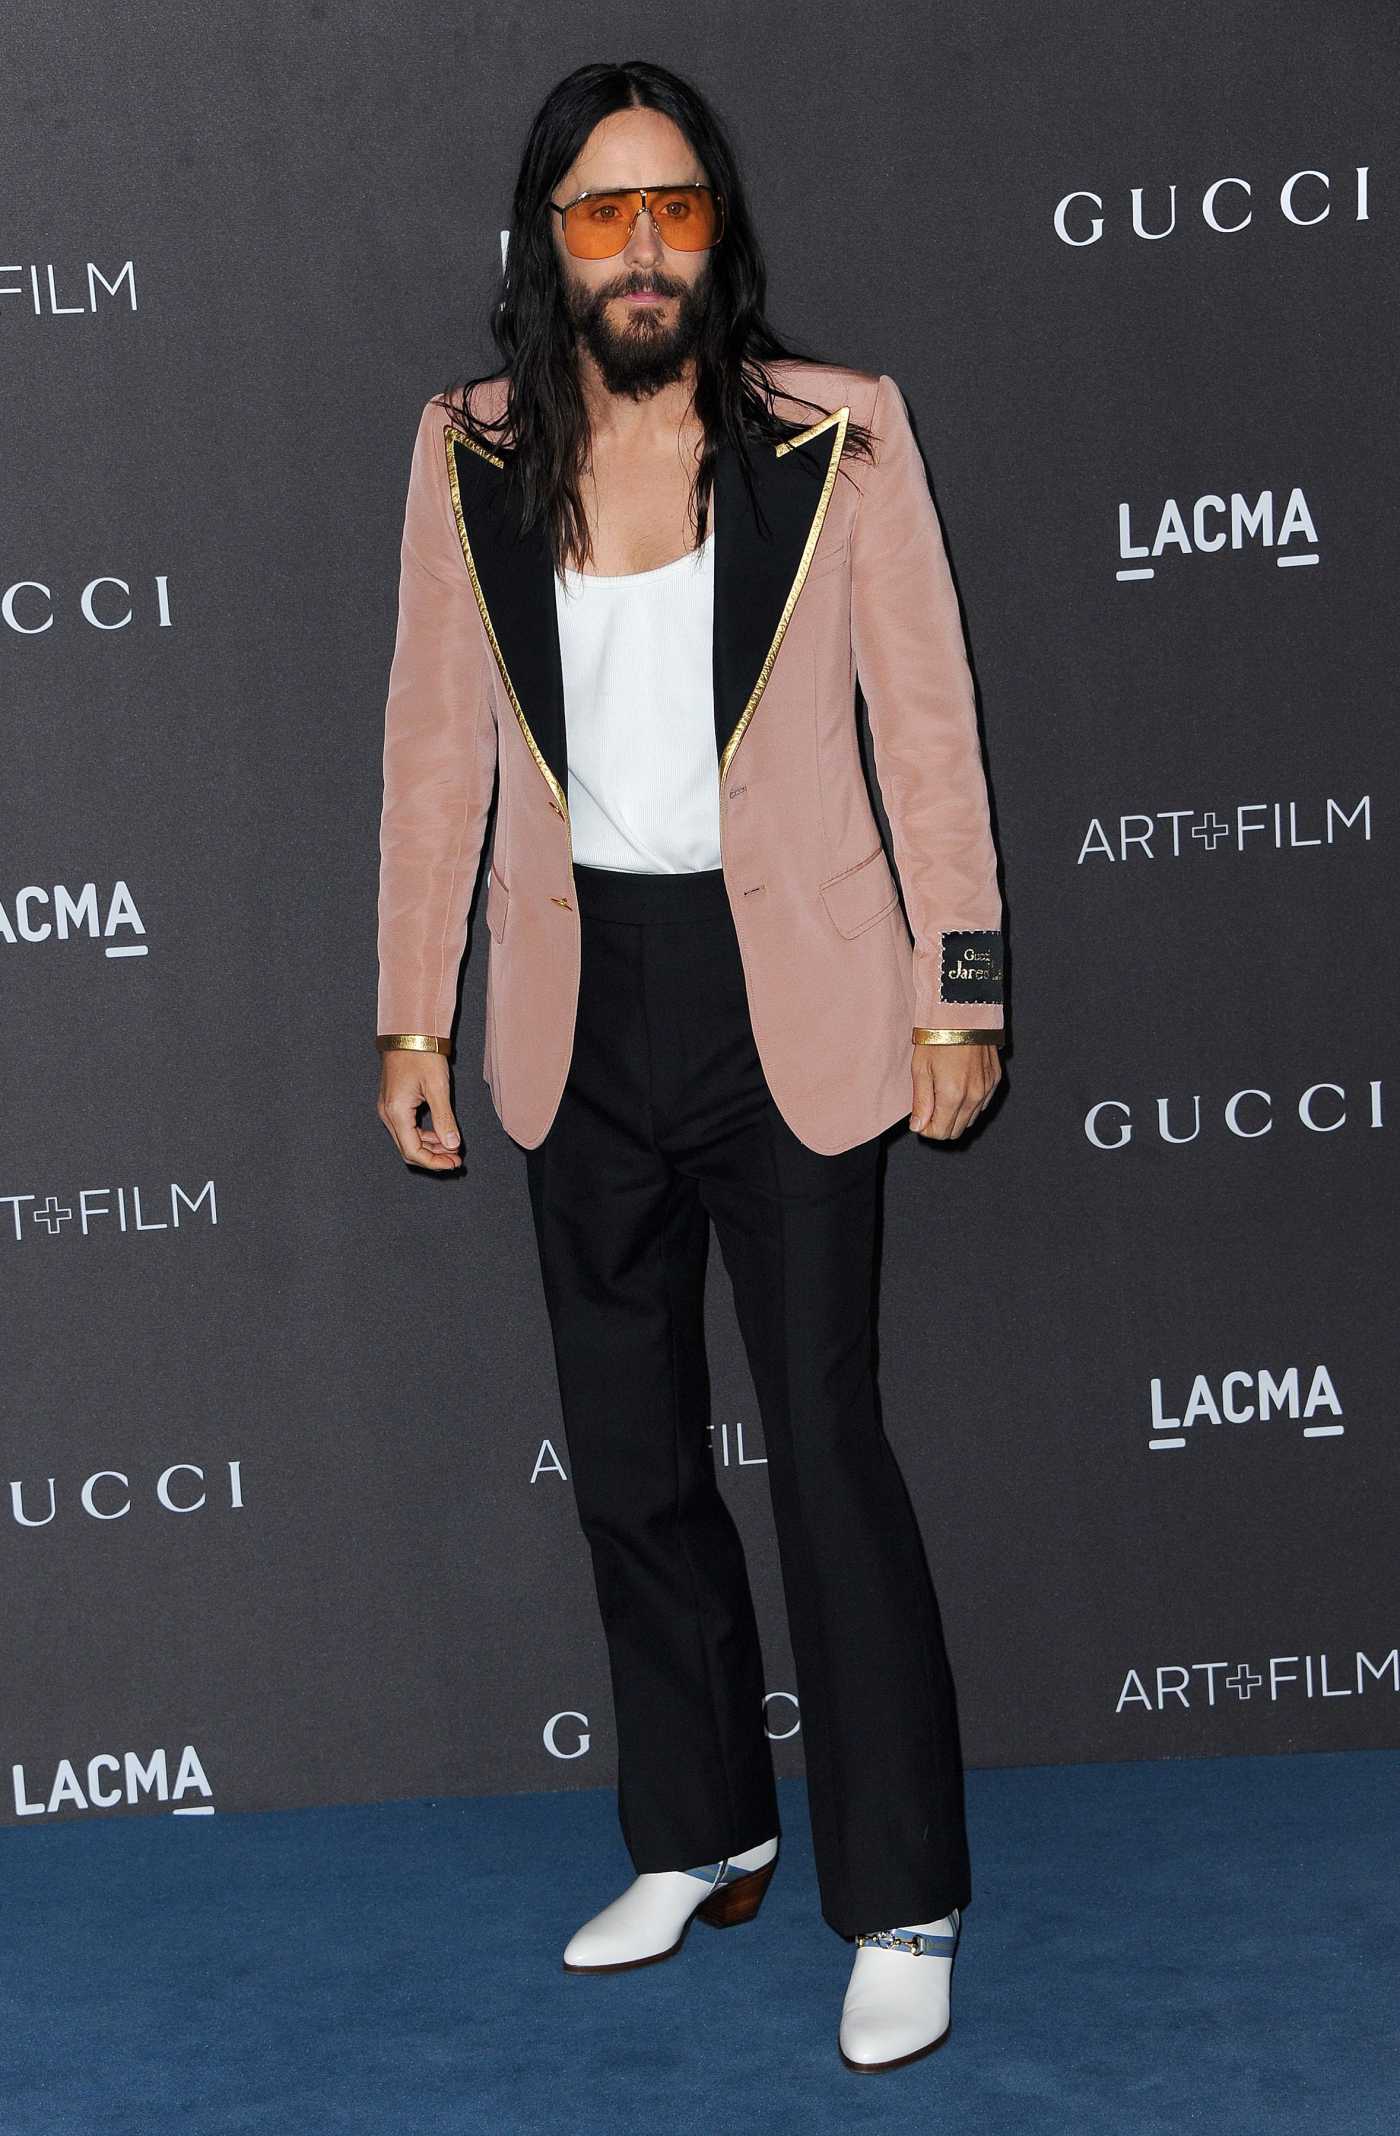 Jared Leto Attends 2019 LACMA Art and Film Gala Honoring Betye Saar And Alfonso Cuaron Presented By Gucci in Los Angeles 11/02/2019